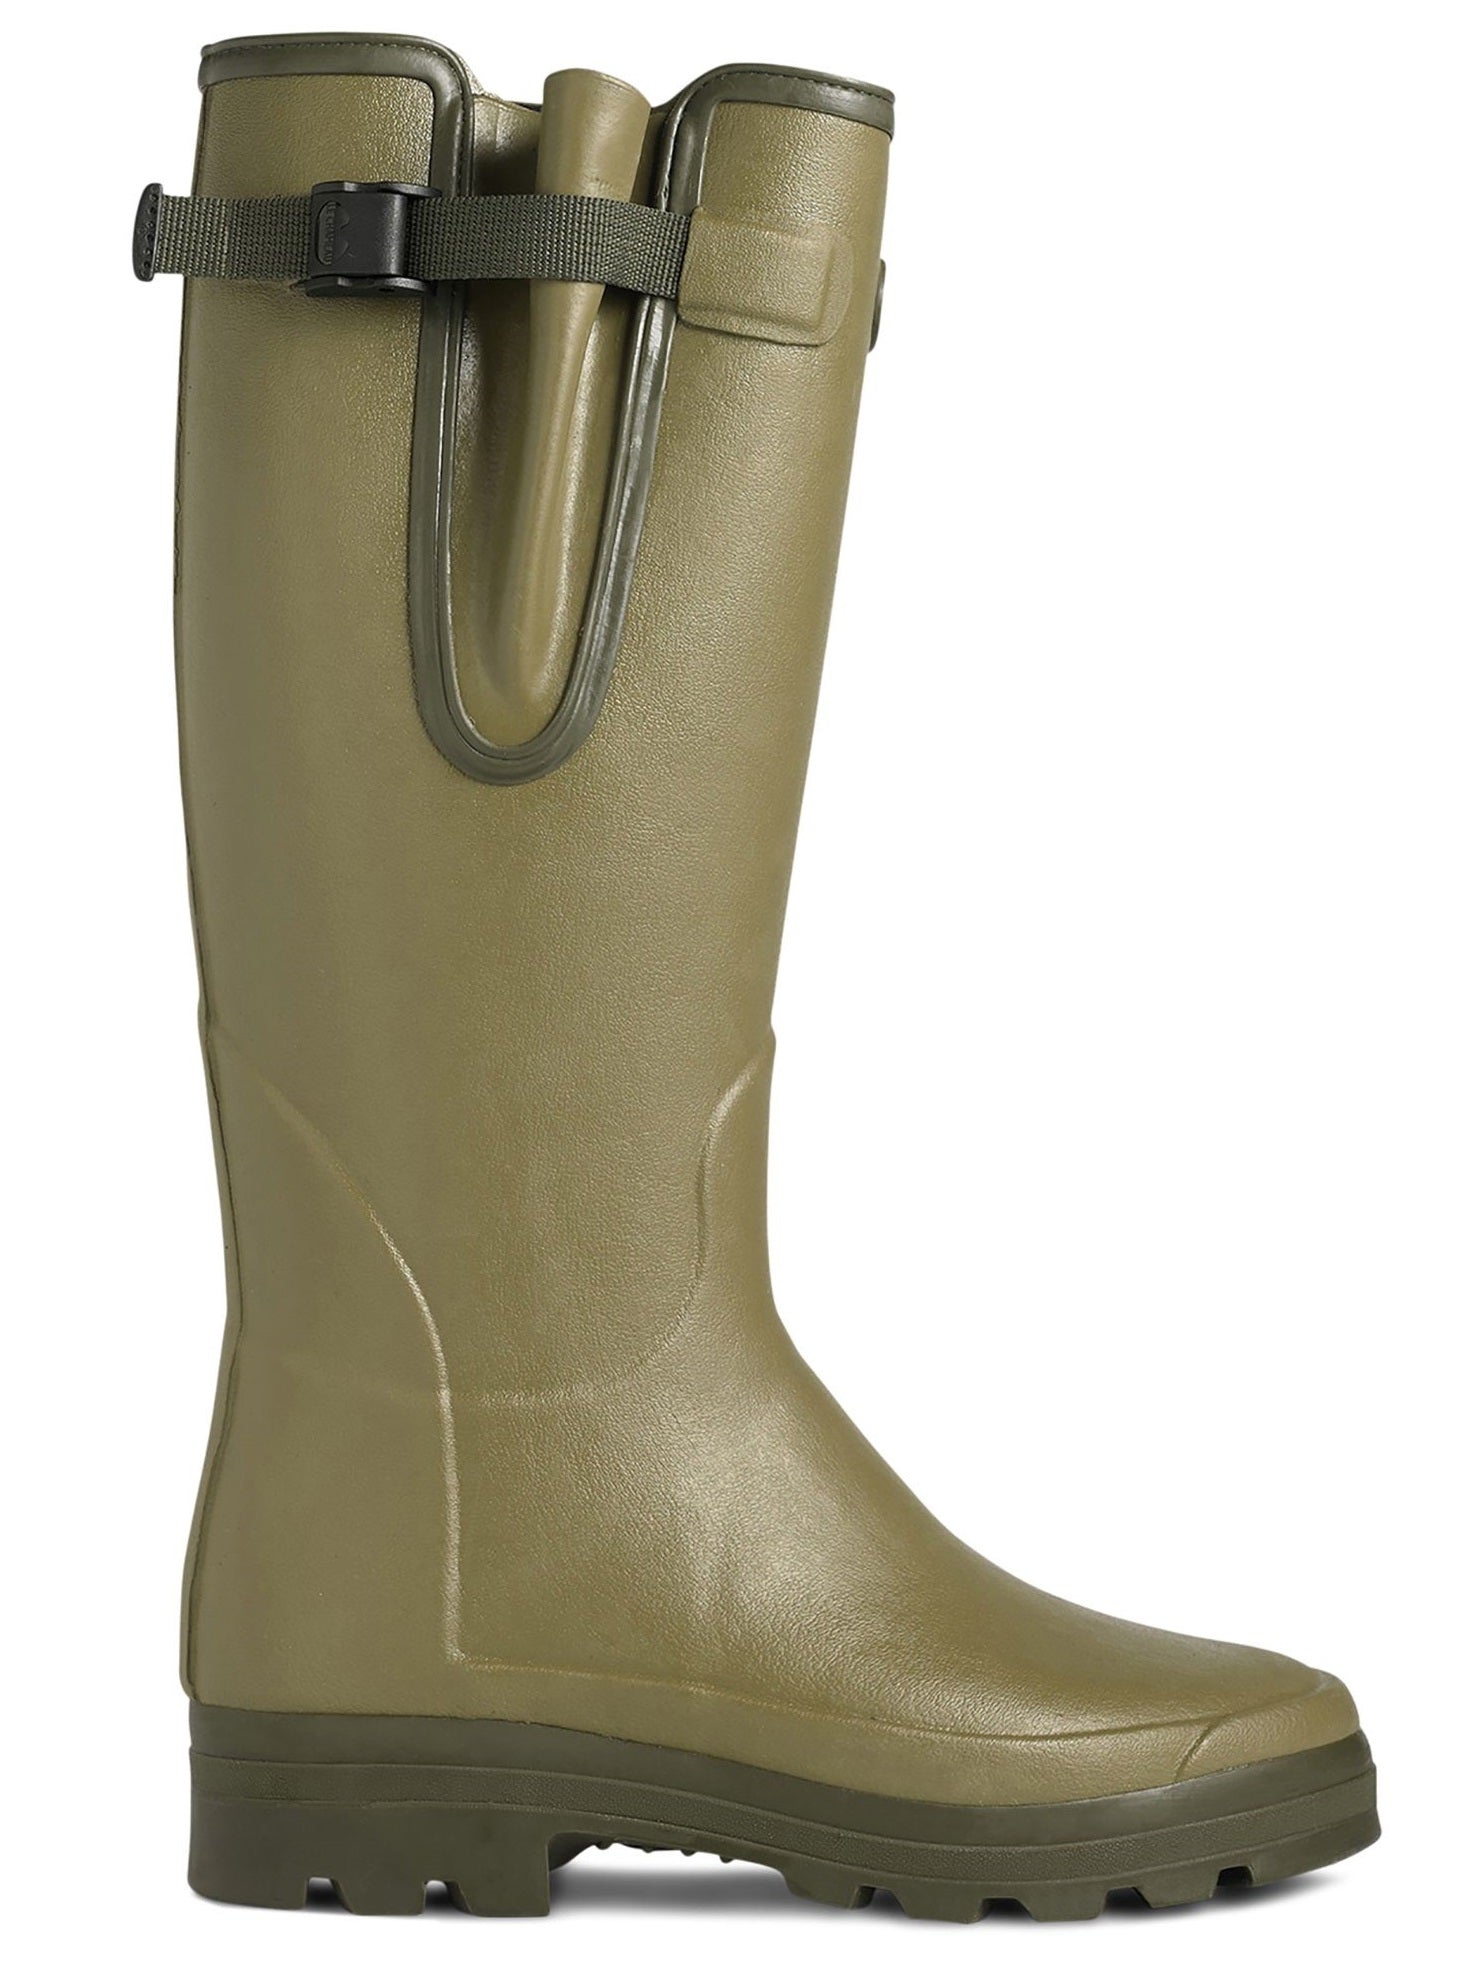 LE CHAMEAU Vierzonord Plus Cold Weather Boots - Mens Neoprene Lined - Iconic Green